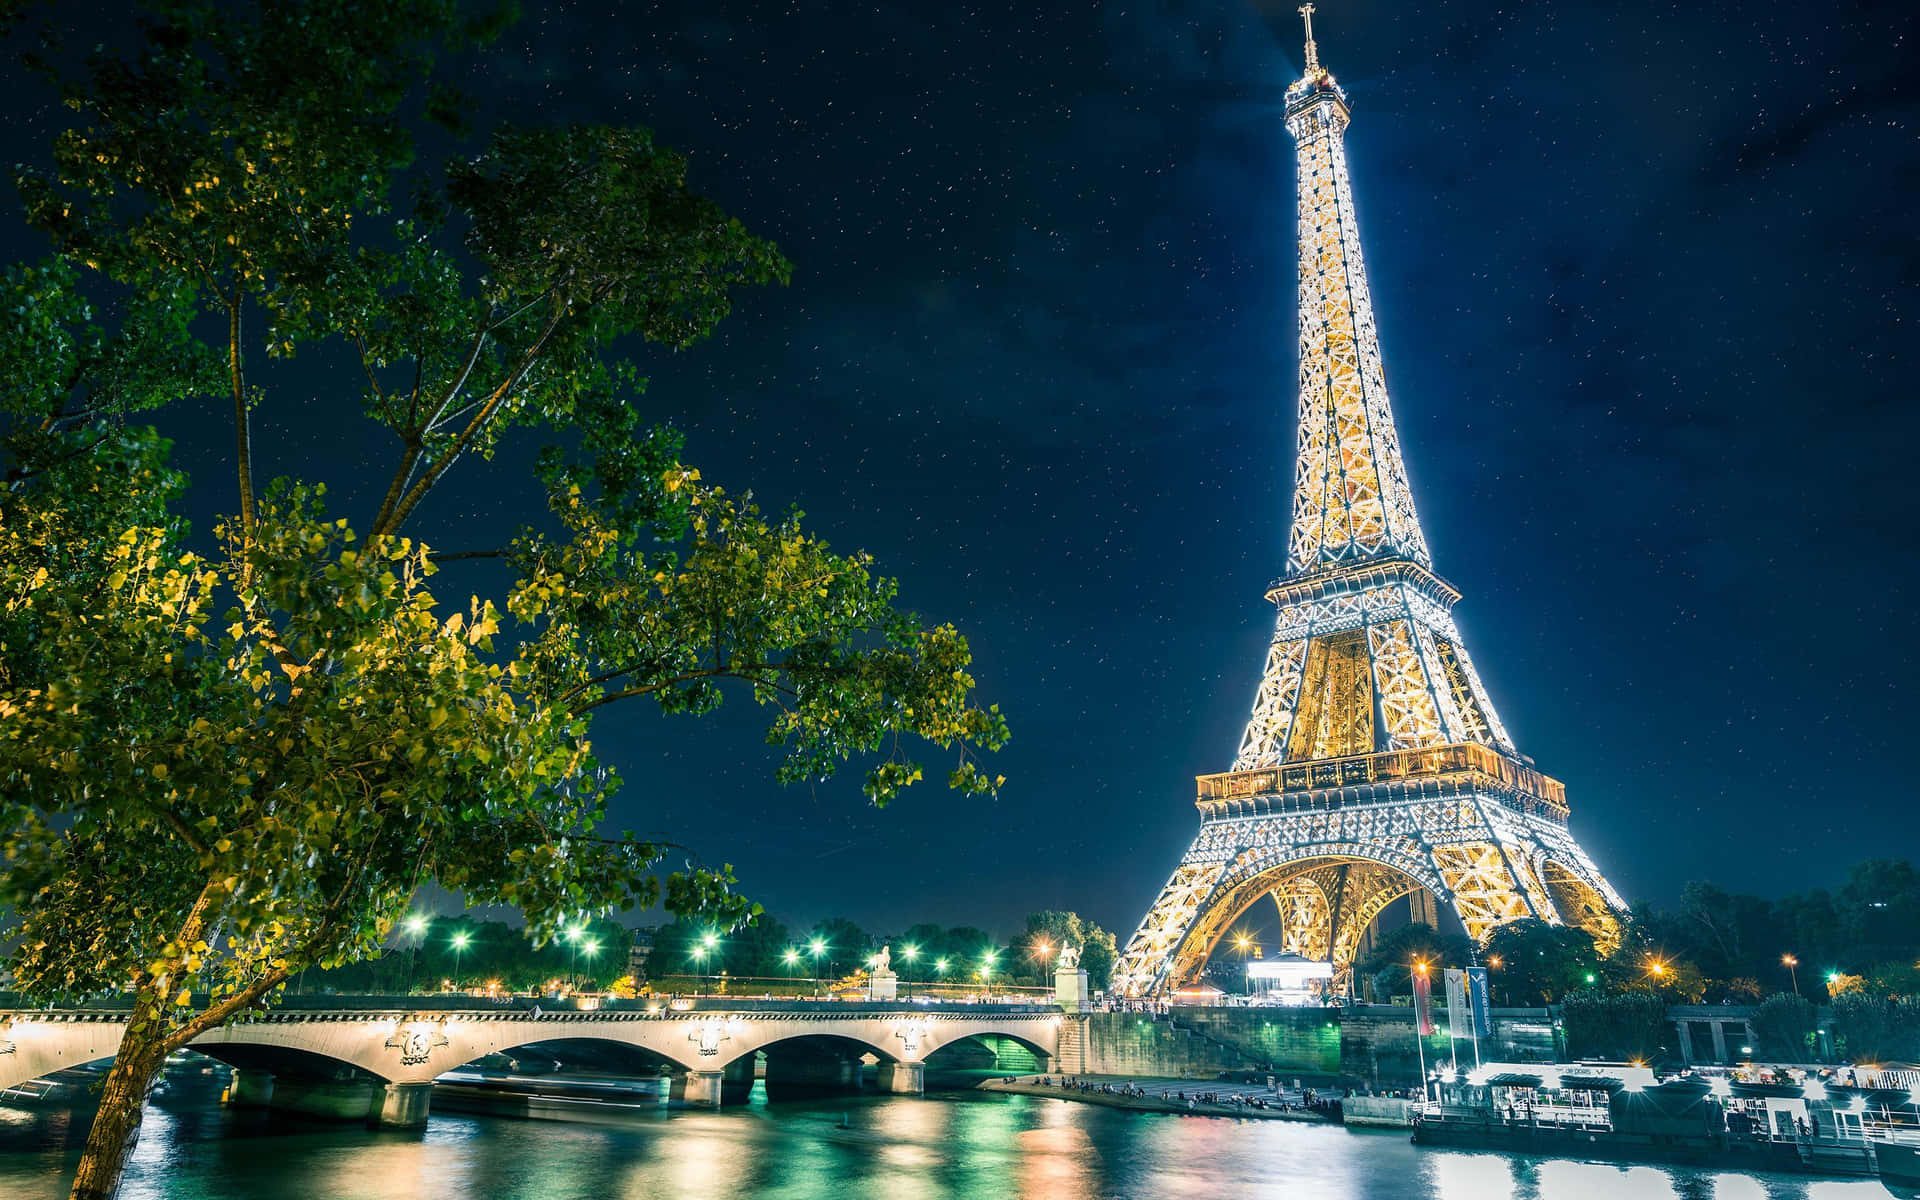 A romantic evening at the Eiffel Tower